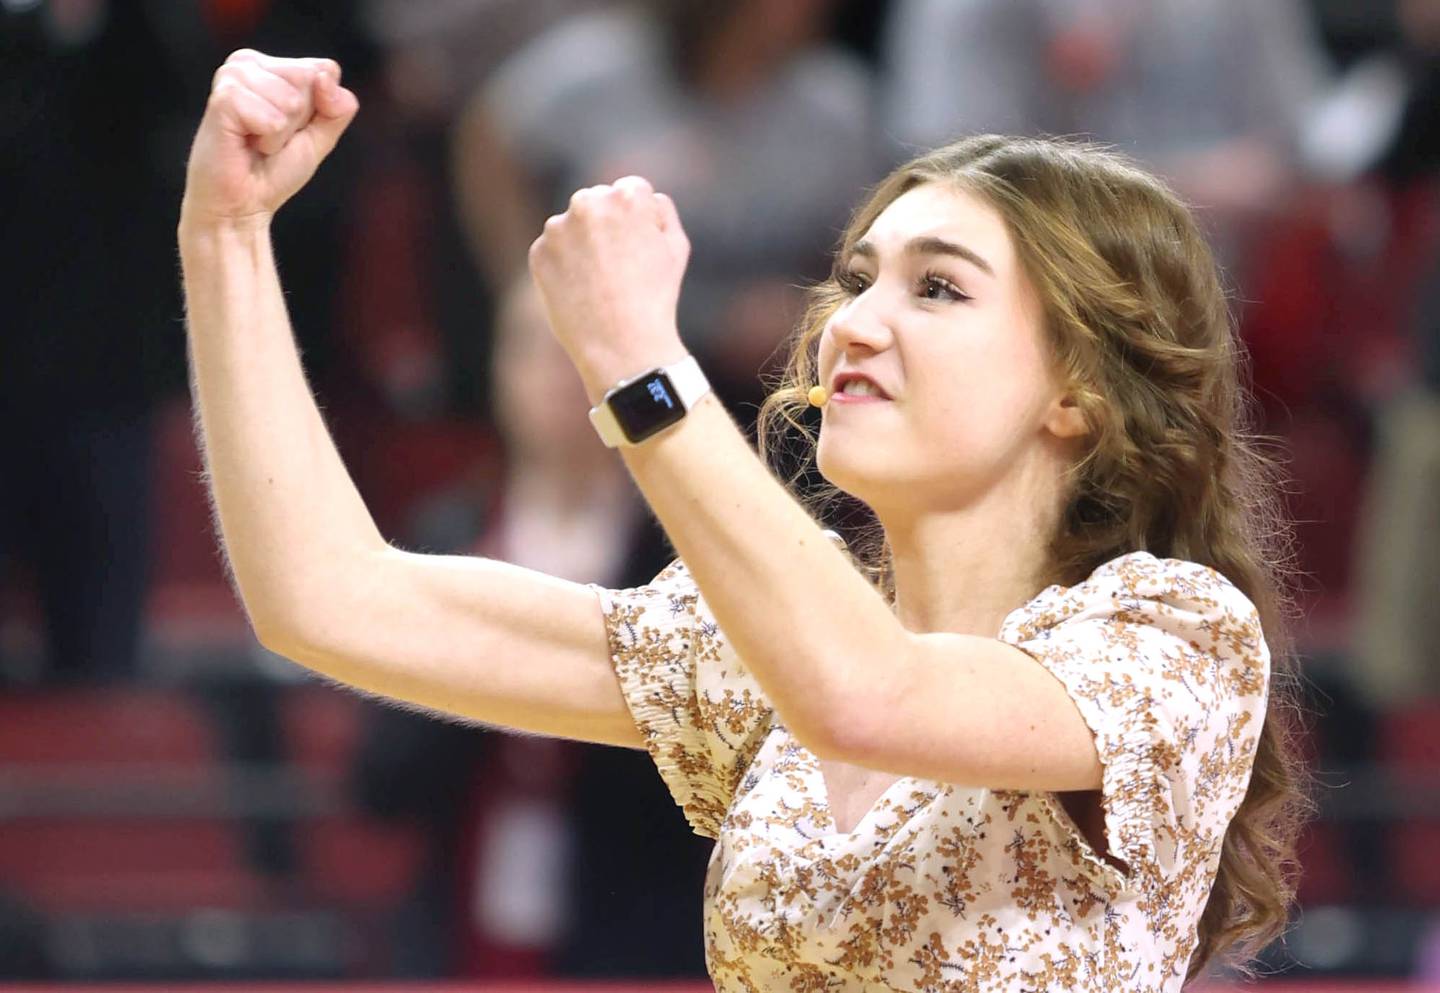 Rock Falls sophomore Remington Collins sings and signs the National Anthem before the Class 4A state semifinal girls basketball game Friday, March 4, 2022, in Redbird Arena at Illinois State University in Normal.